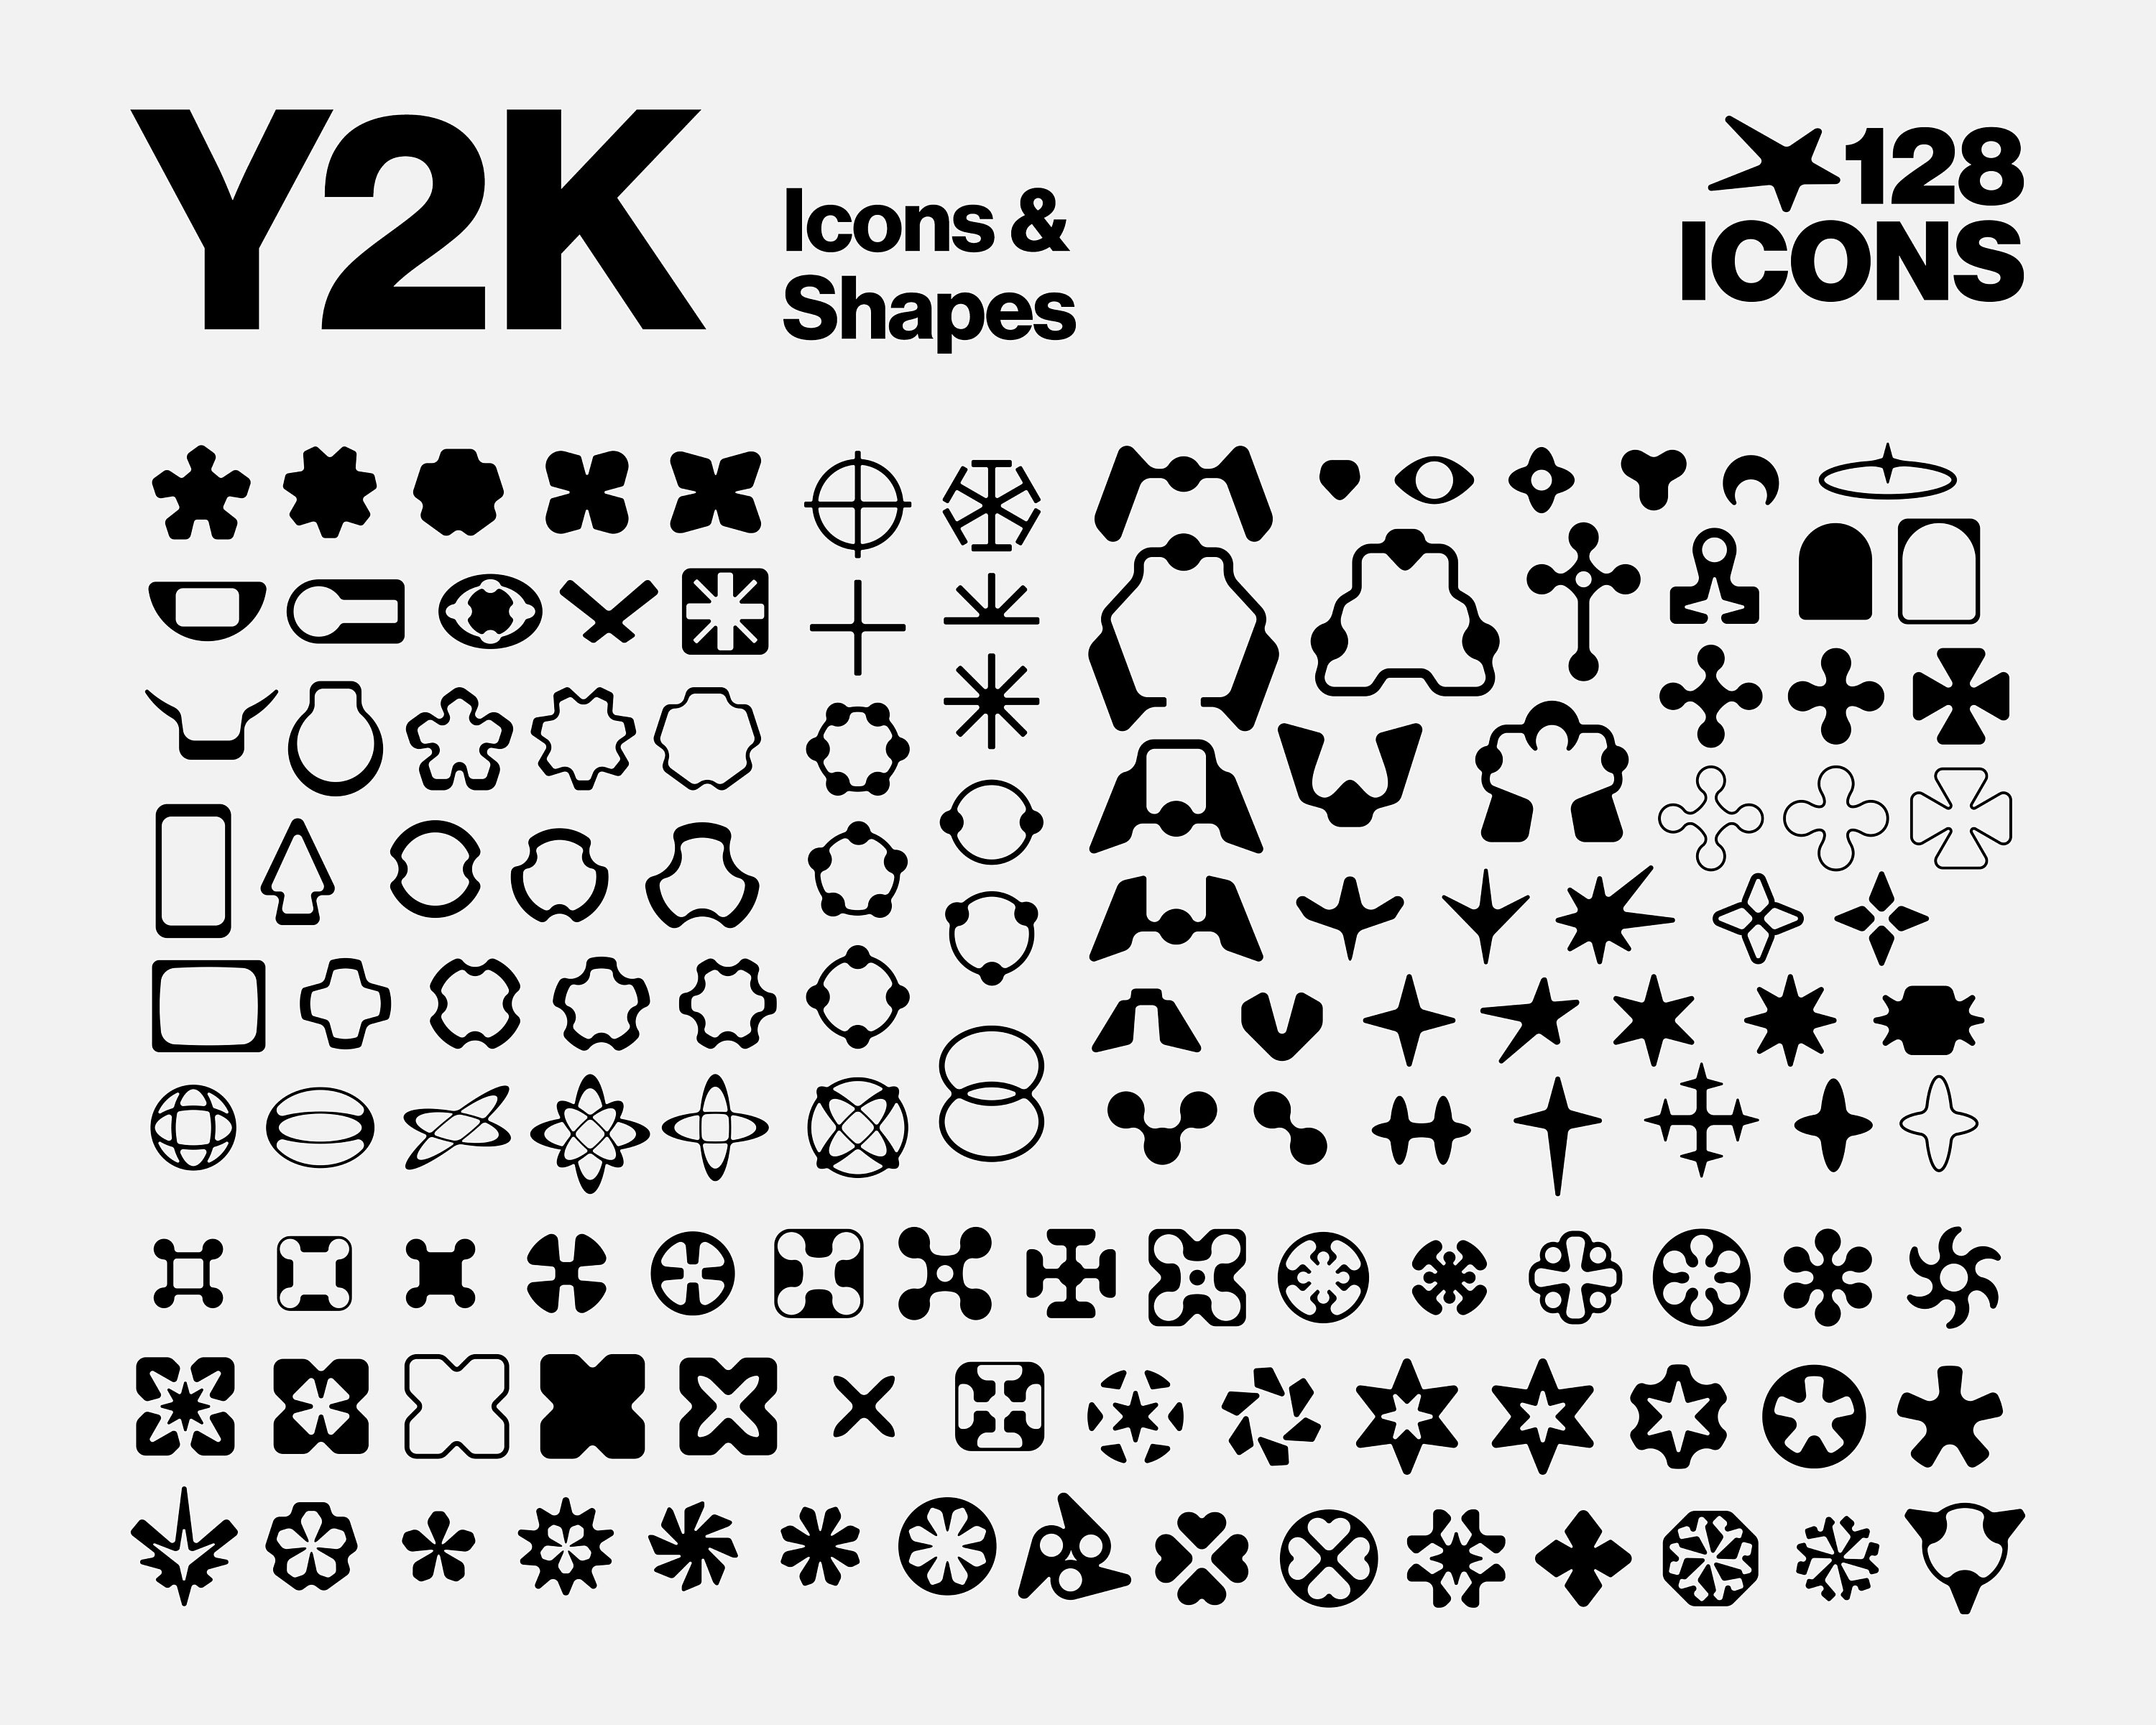 Y2K ICON PACK! —